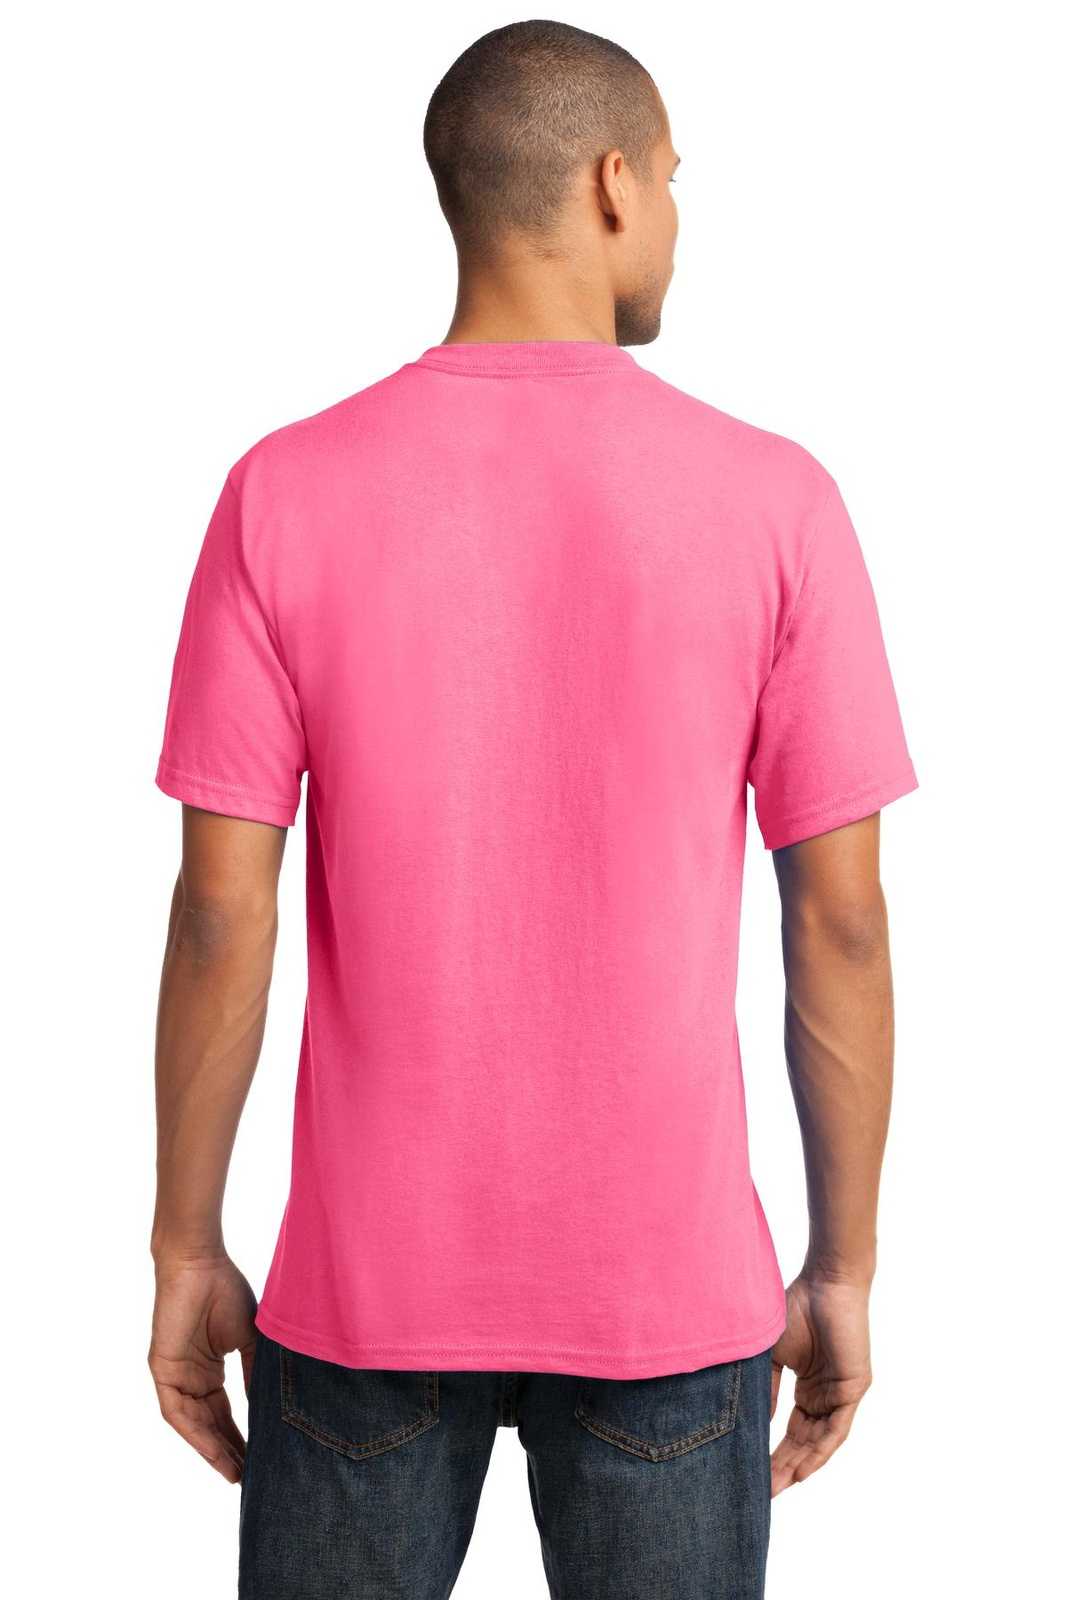 Port & Company PC54V Core Cotton V-Neck Tee - Neon Pink - HIT a Double - 1